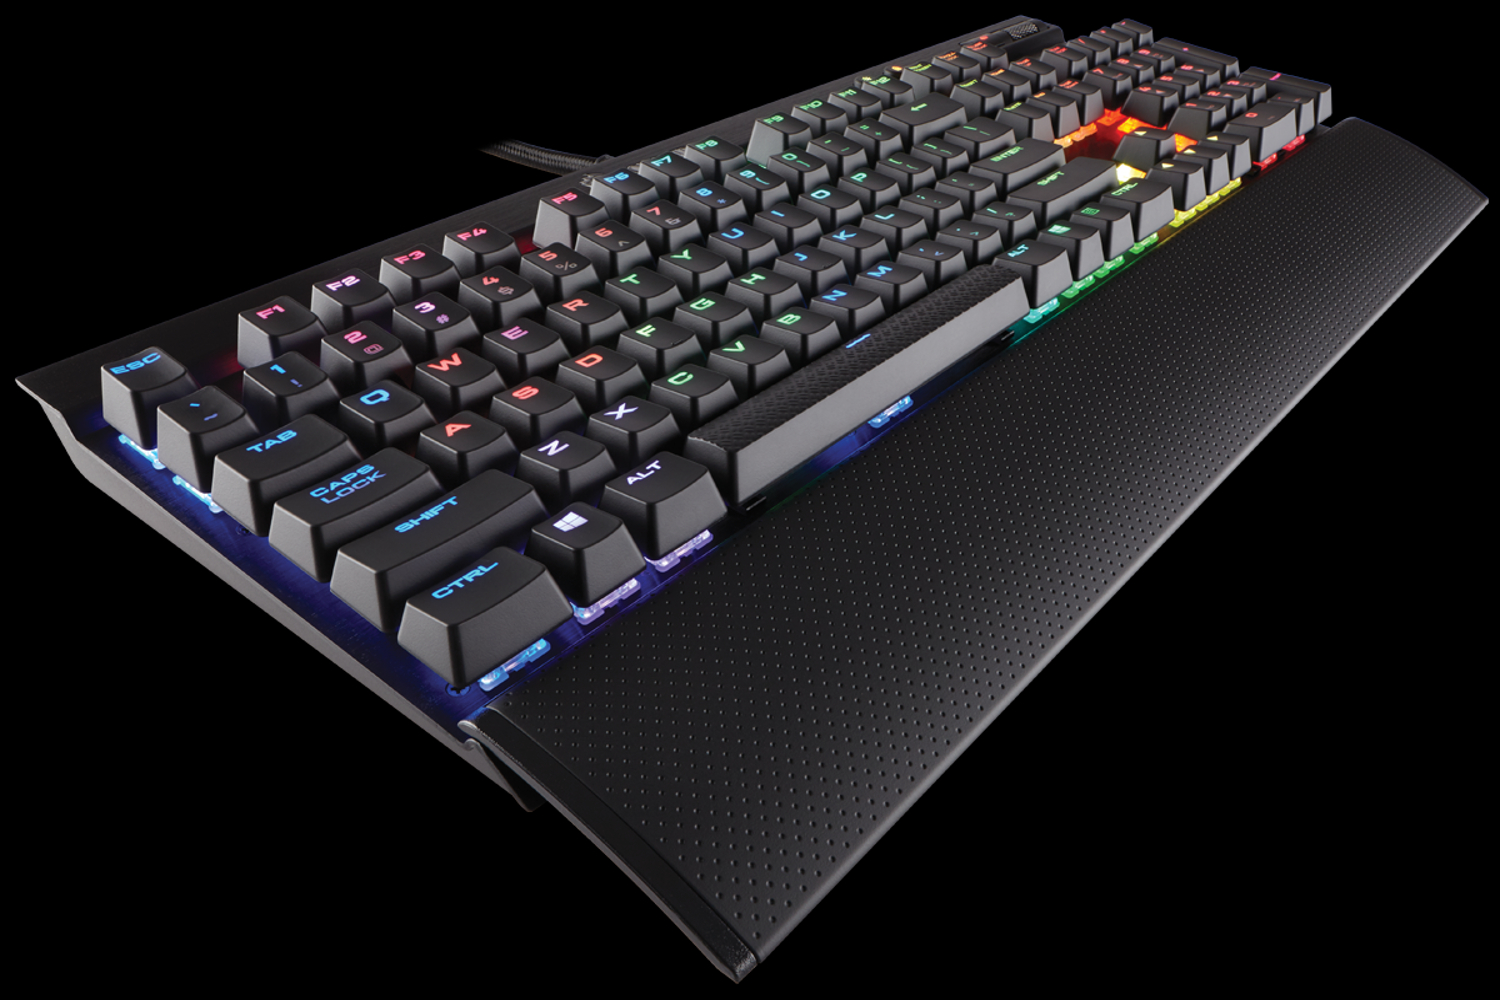 corsair launches lux mechanical keyboards pc gaming k70 rgb